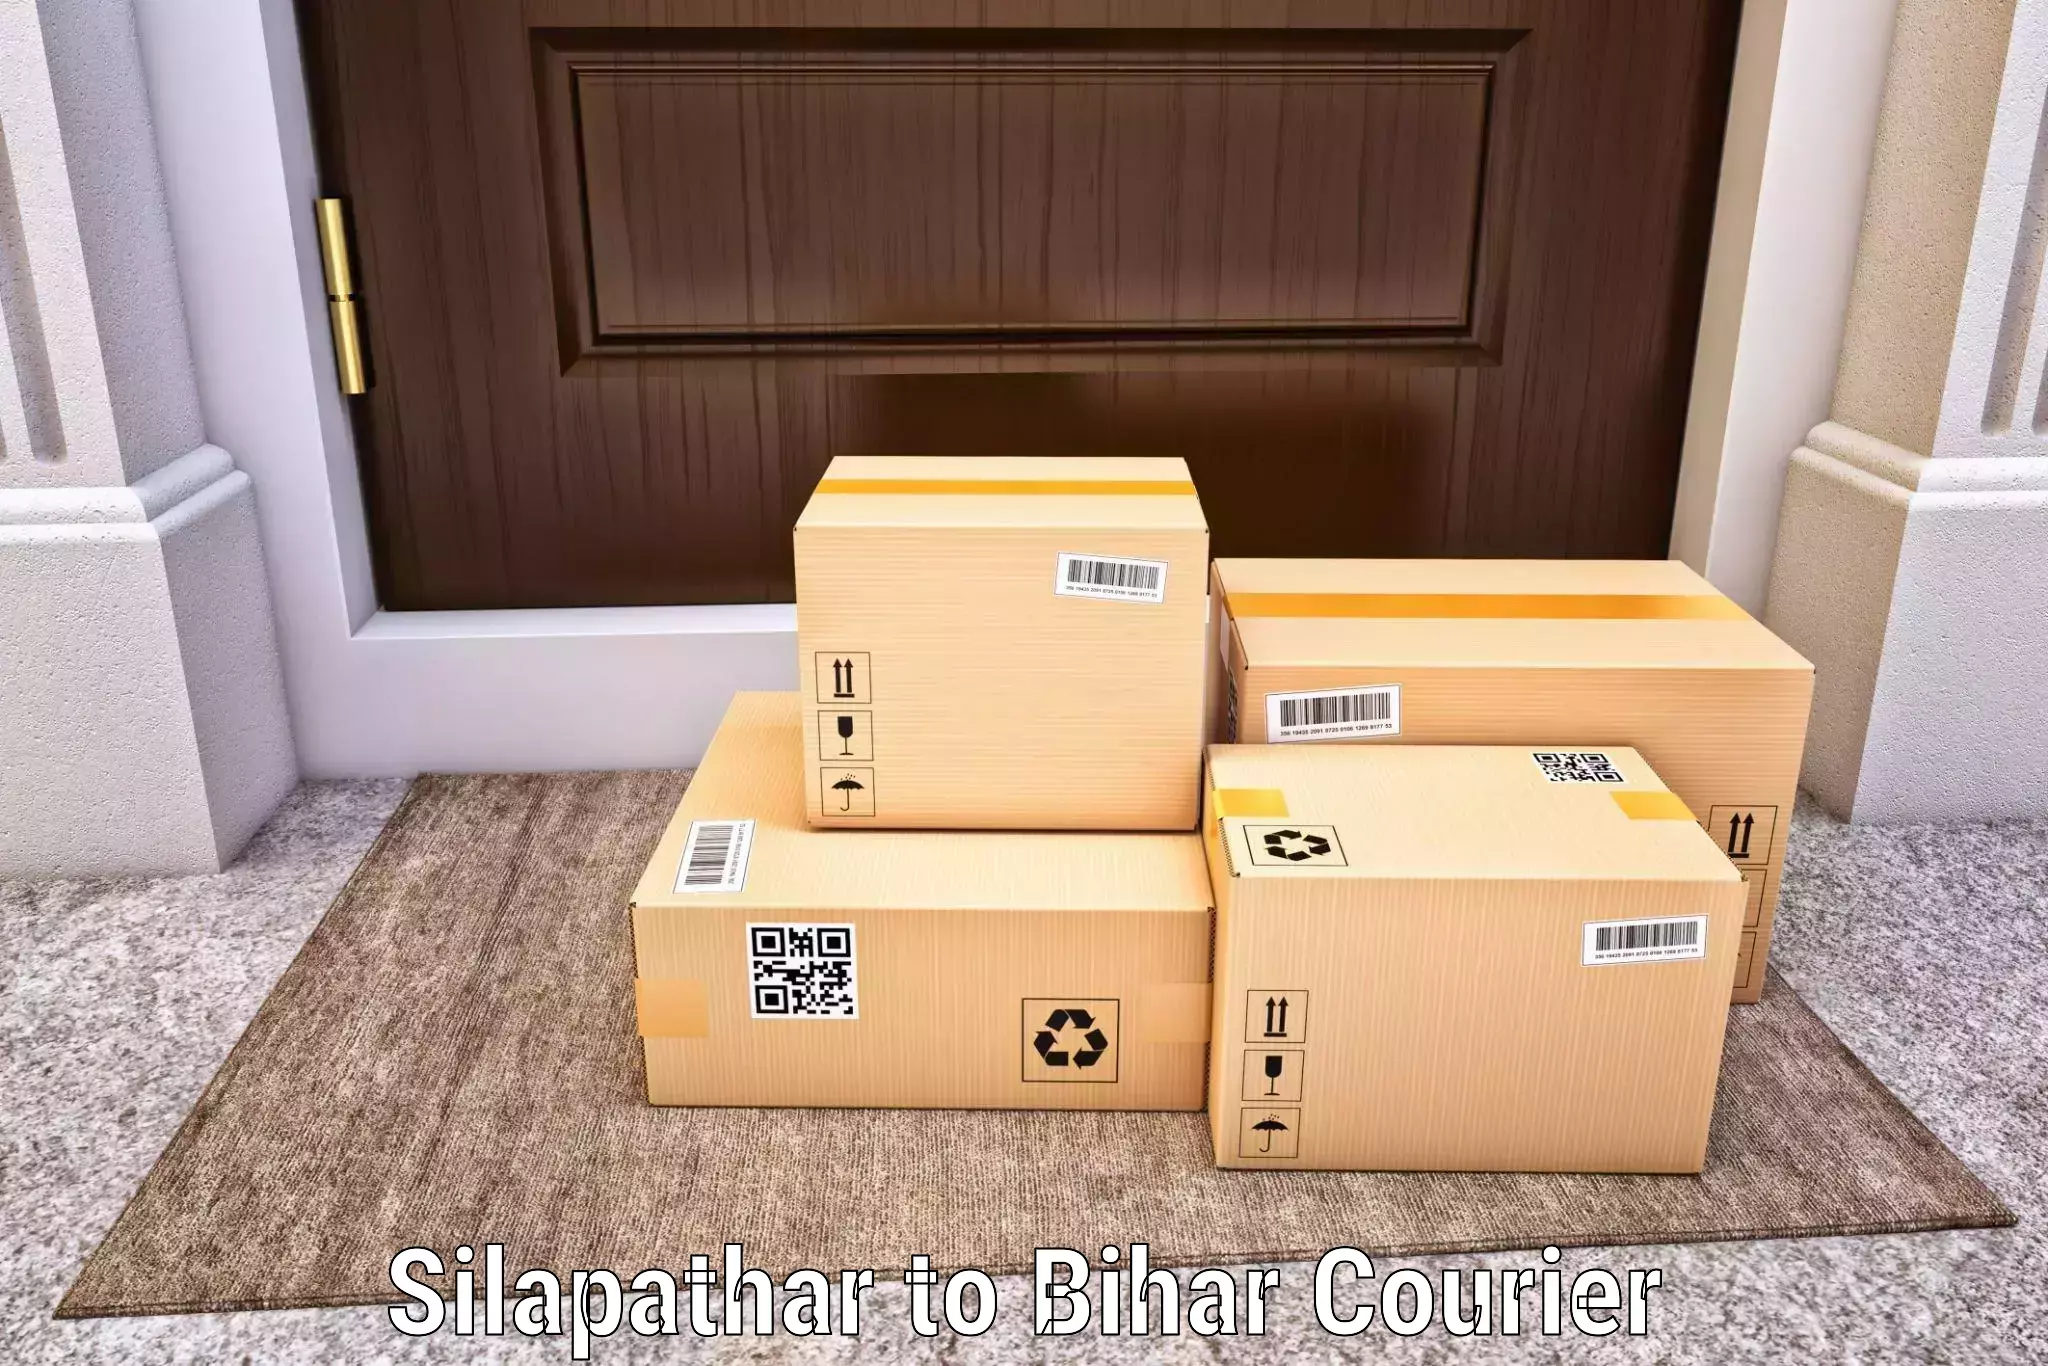 Digital courier platforms Silapathar to Rajpur